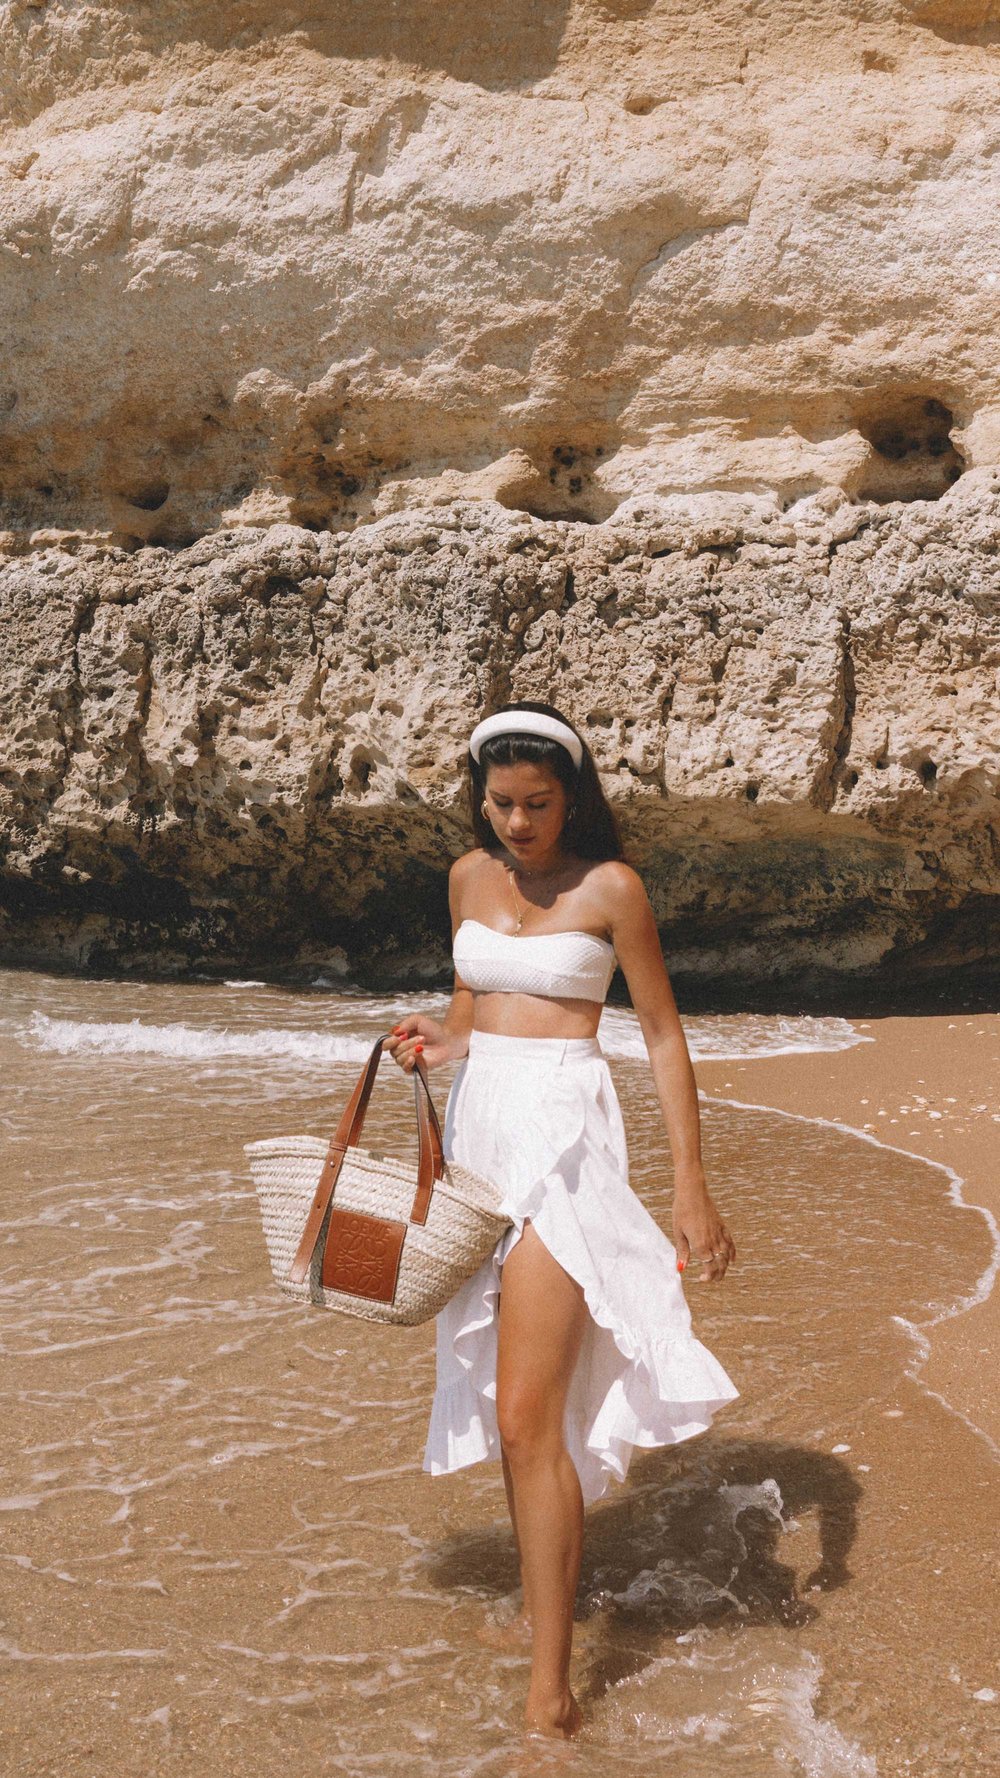 Summer Travel in Algarve, Portugal. Sarah Butler of @SarahChristine wearing cute summer beach outfit in sandy coves of Algarve, Portugal -5.jpg